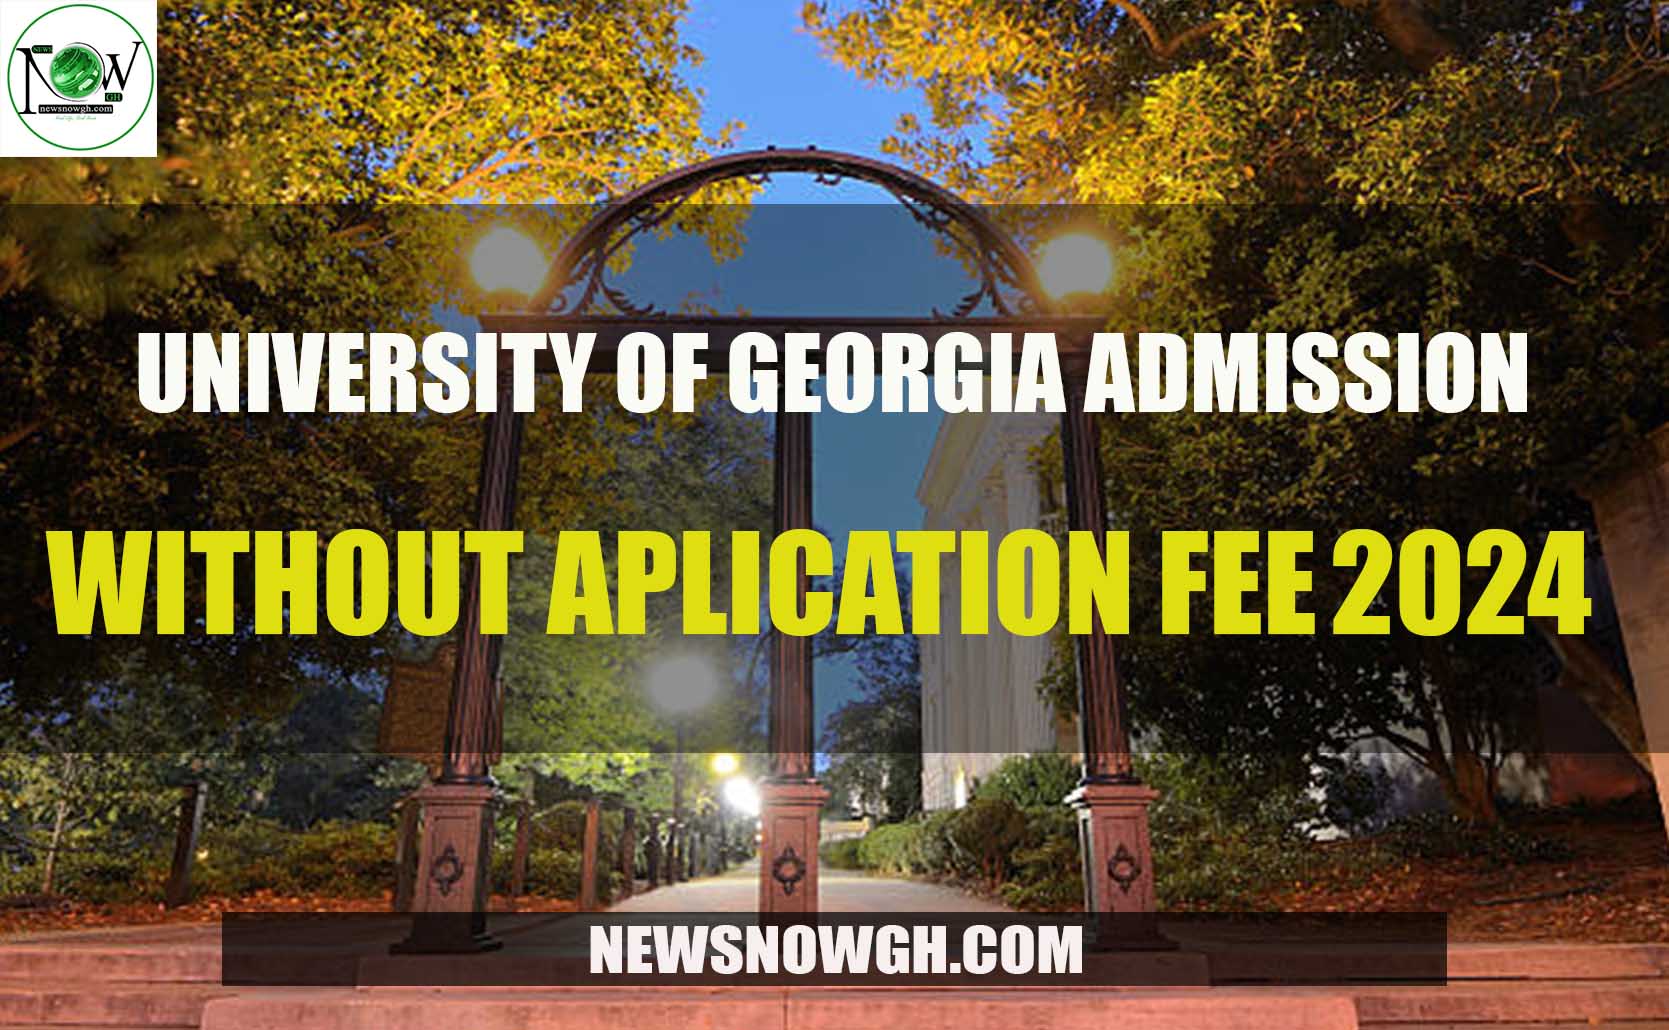 University of admissions without application fee for 202425